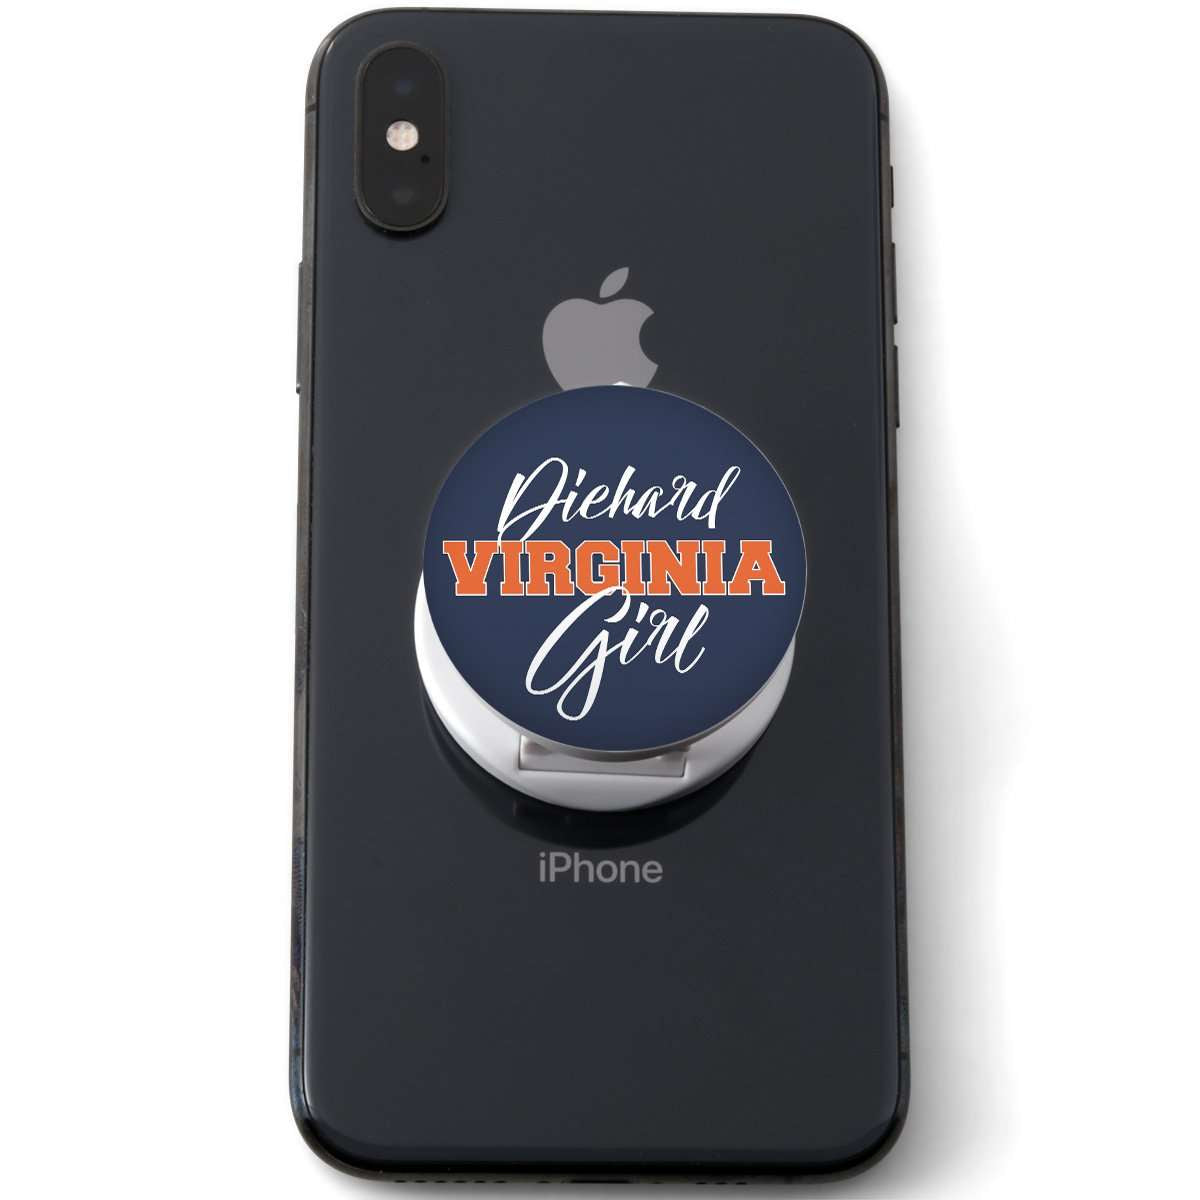 Designs by MyUtopia Shout Out:Diehard Virginia Girl Hinged Pop-out Phone Grip and Stand for Smartphones and Tablets